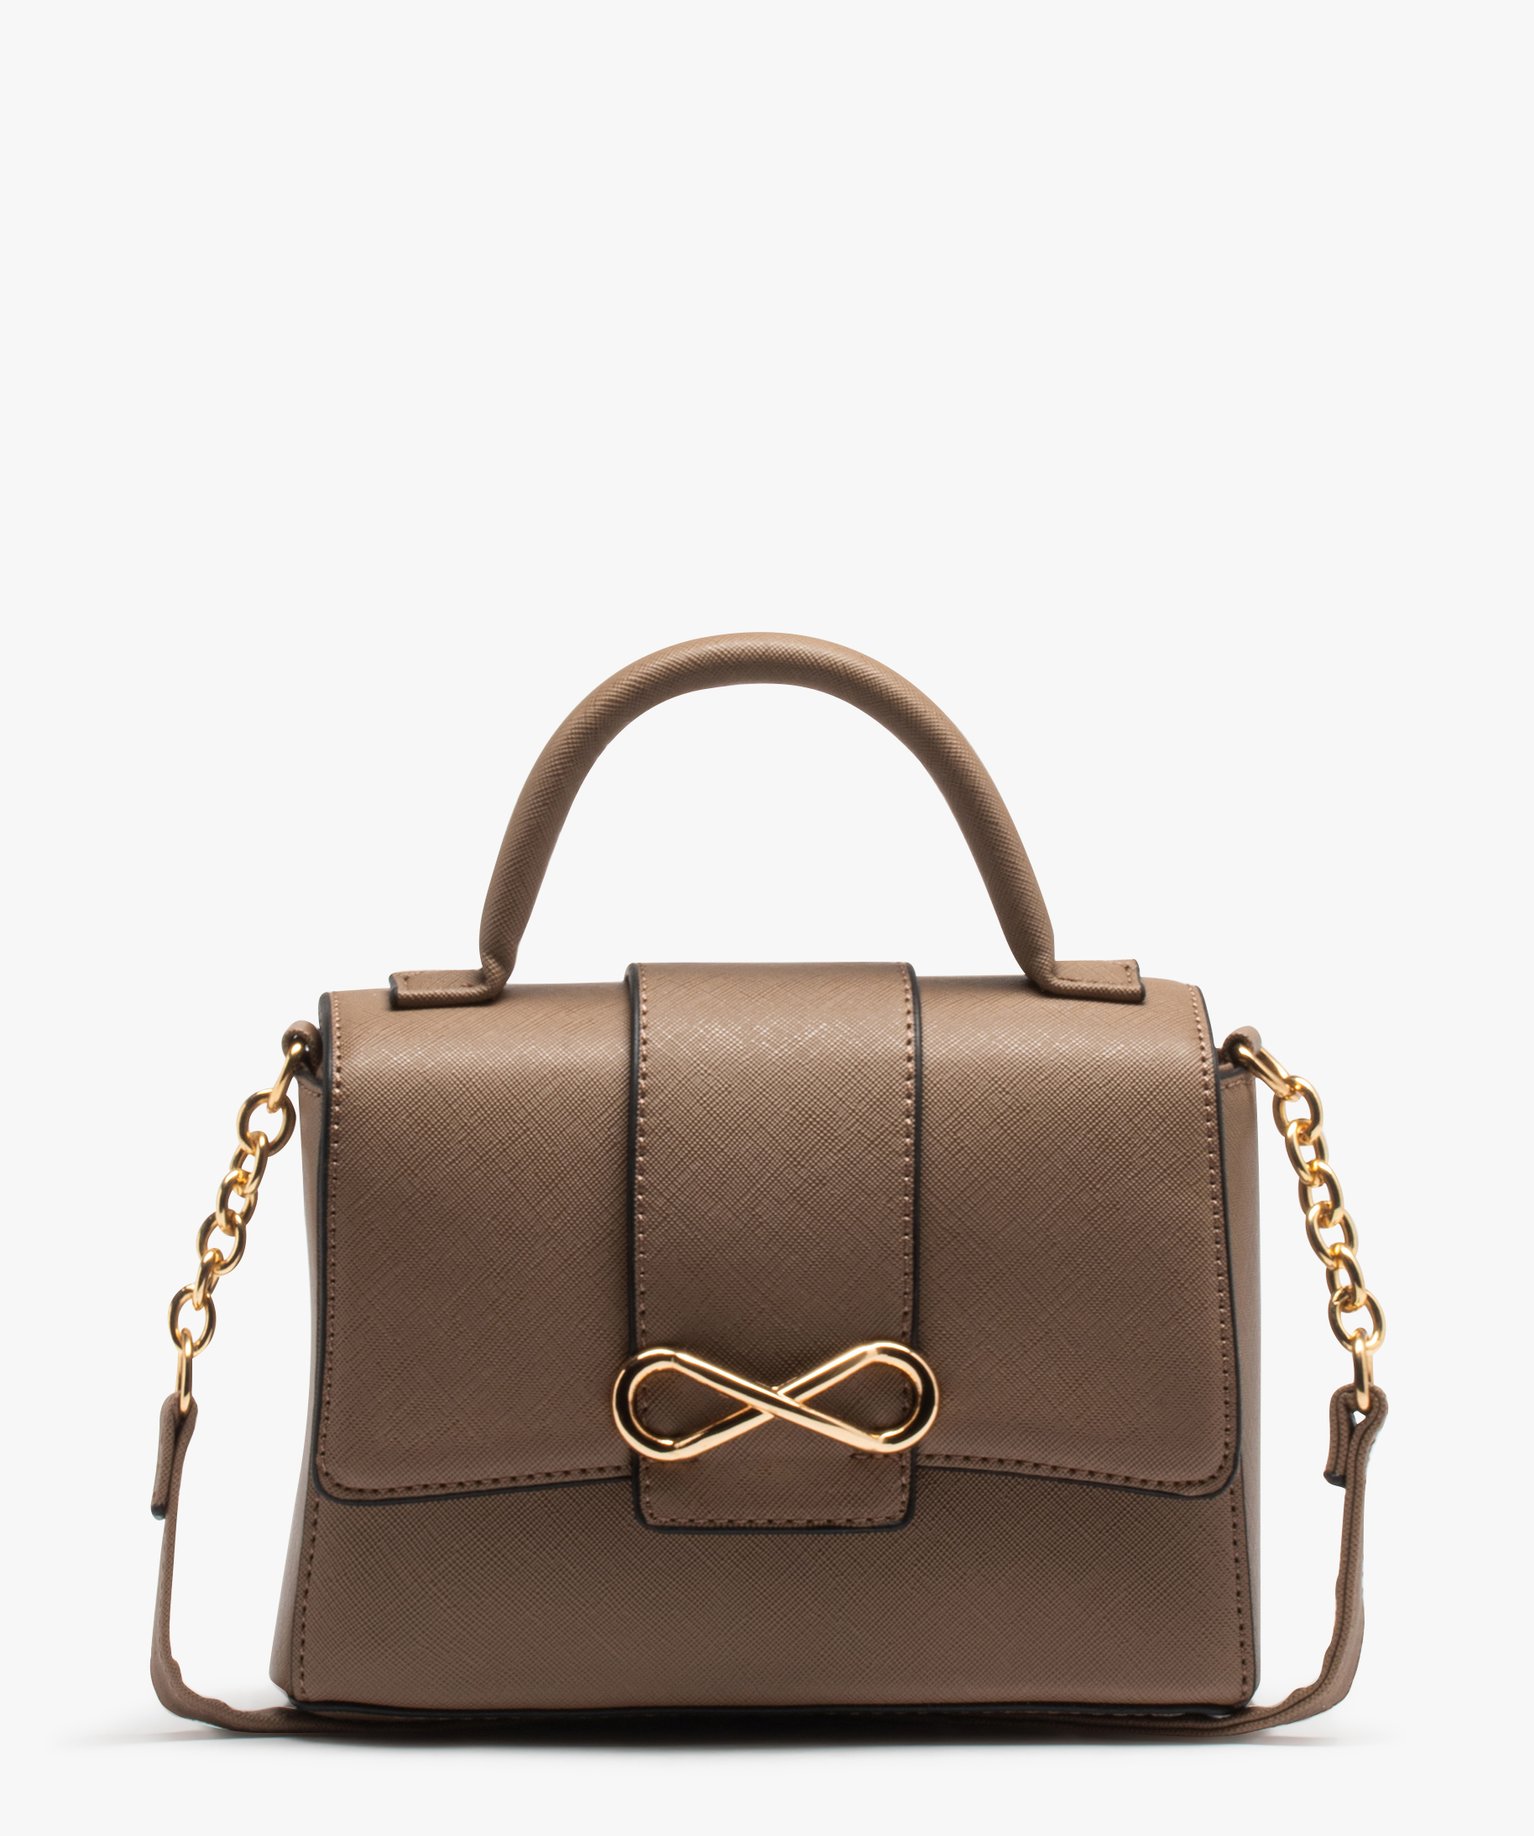 sac besace compact a bandouliere chaine brun sacs bandouliere